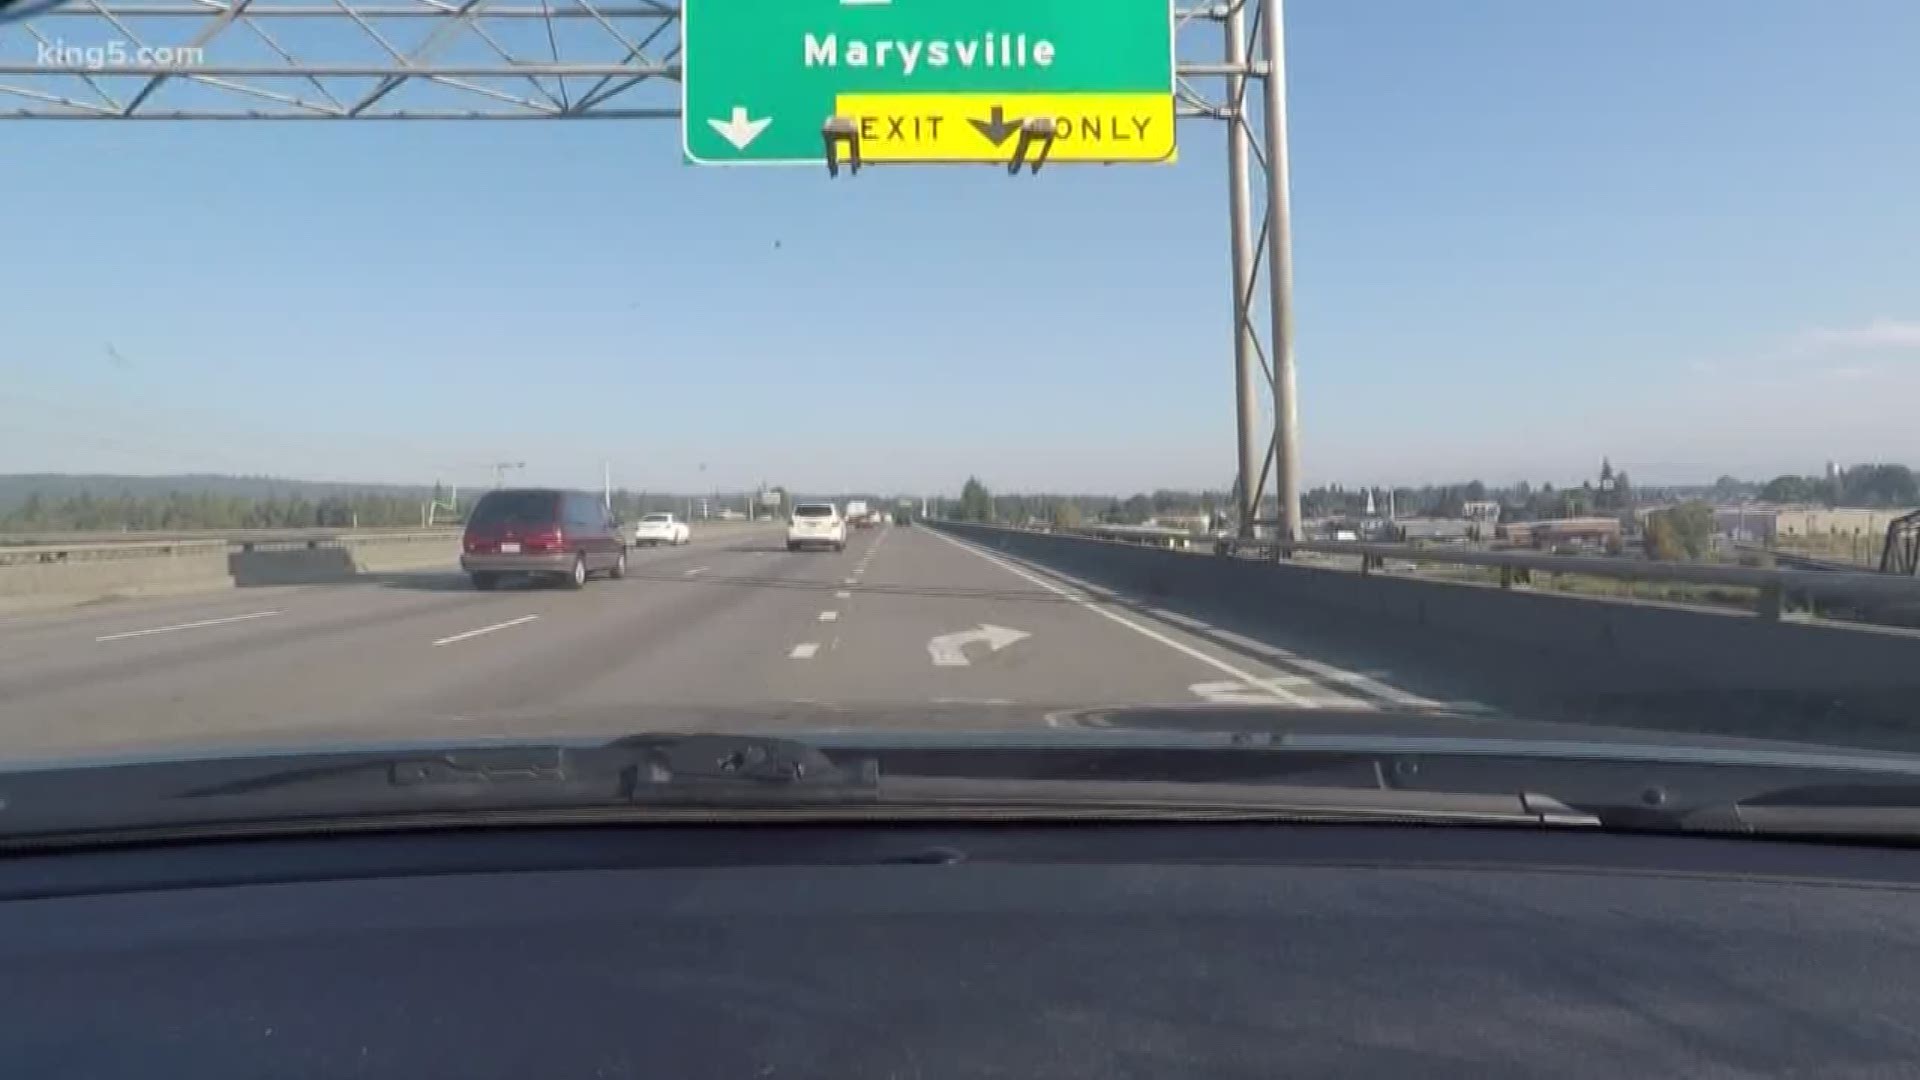 The First Street bypass project in Marysville will allow drivers another option to get off I-5 and head east into the city. It's expected to finish by 2020. A new interchange at I-5 and SR 529, which is expected to wrap up construction in 2022, also aims to relieve traffic congestion.